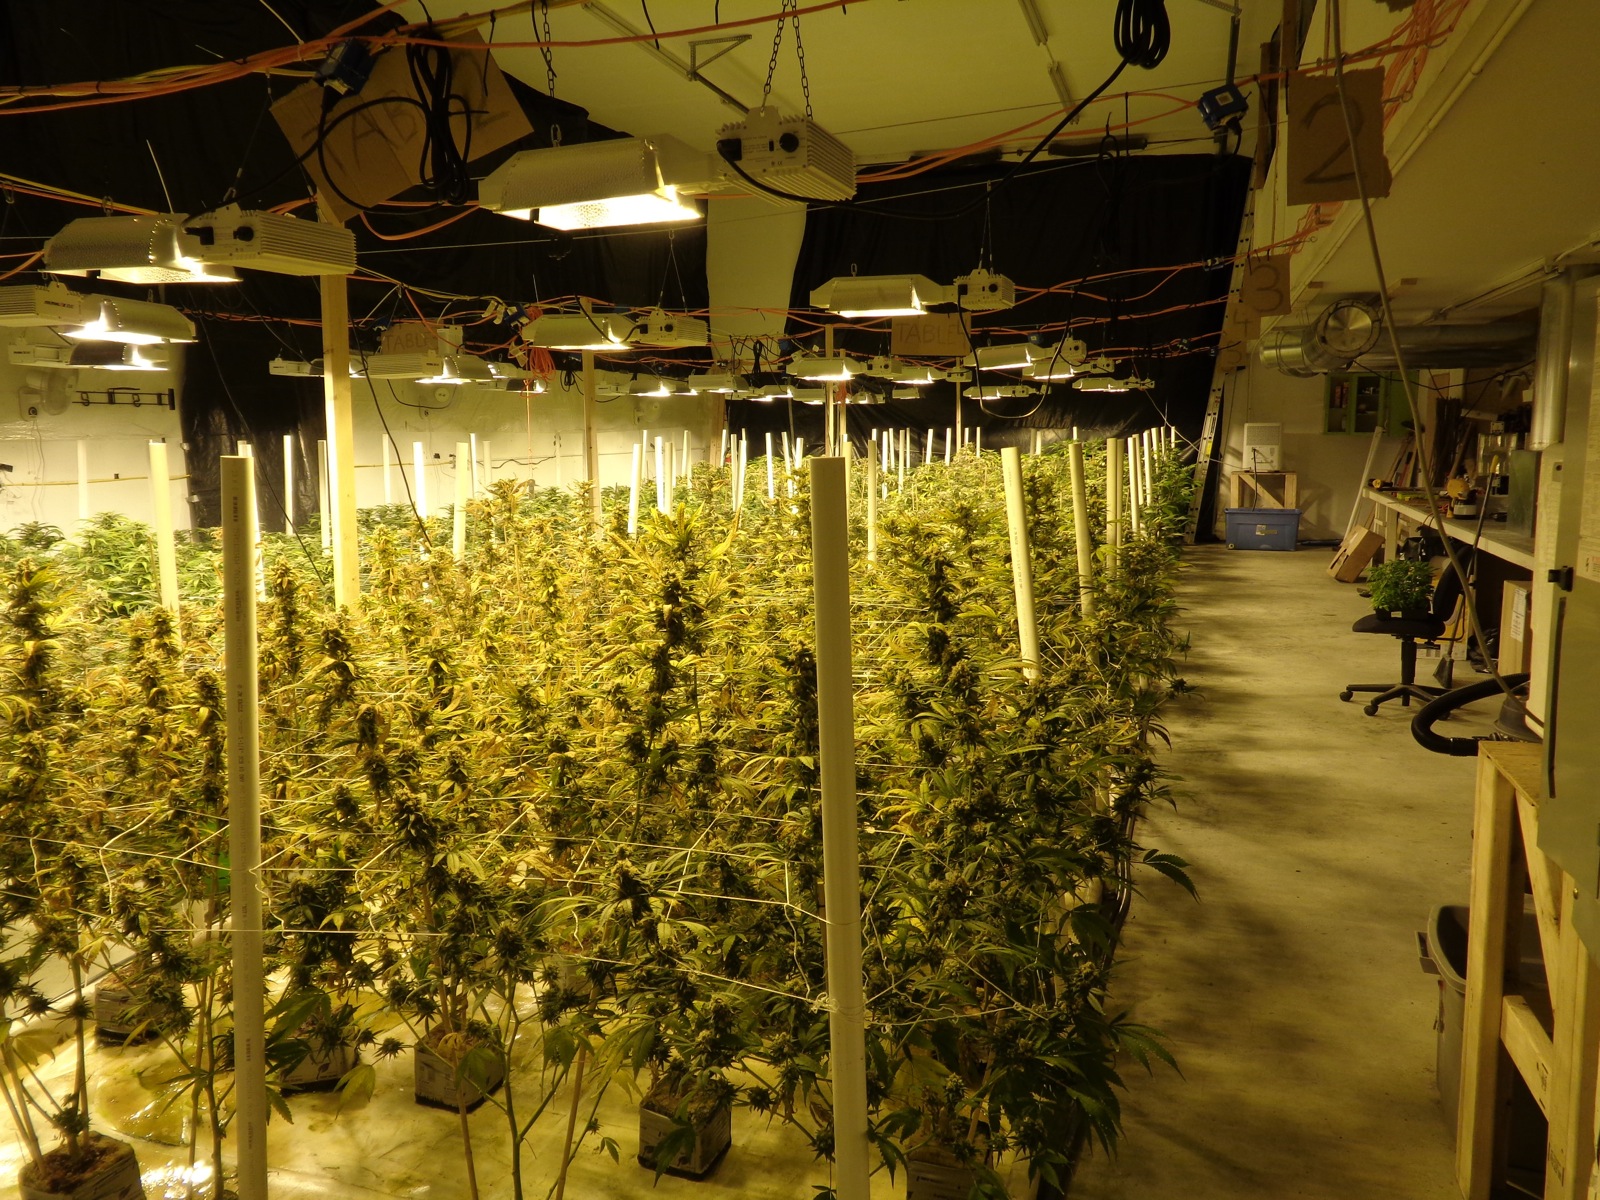 Mature and budding cannabis plants fill up one bay of a 4,400-square-foot building where Homer Police busted a record marijuana grow operation with 1,000 plants.-Photo provided, Homer Police